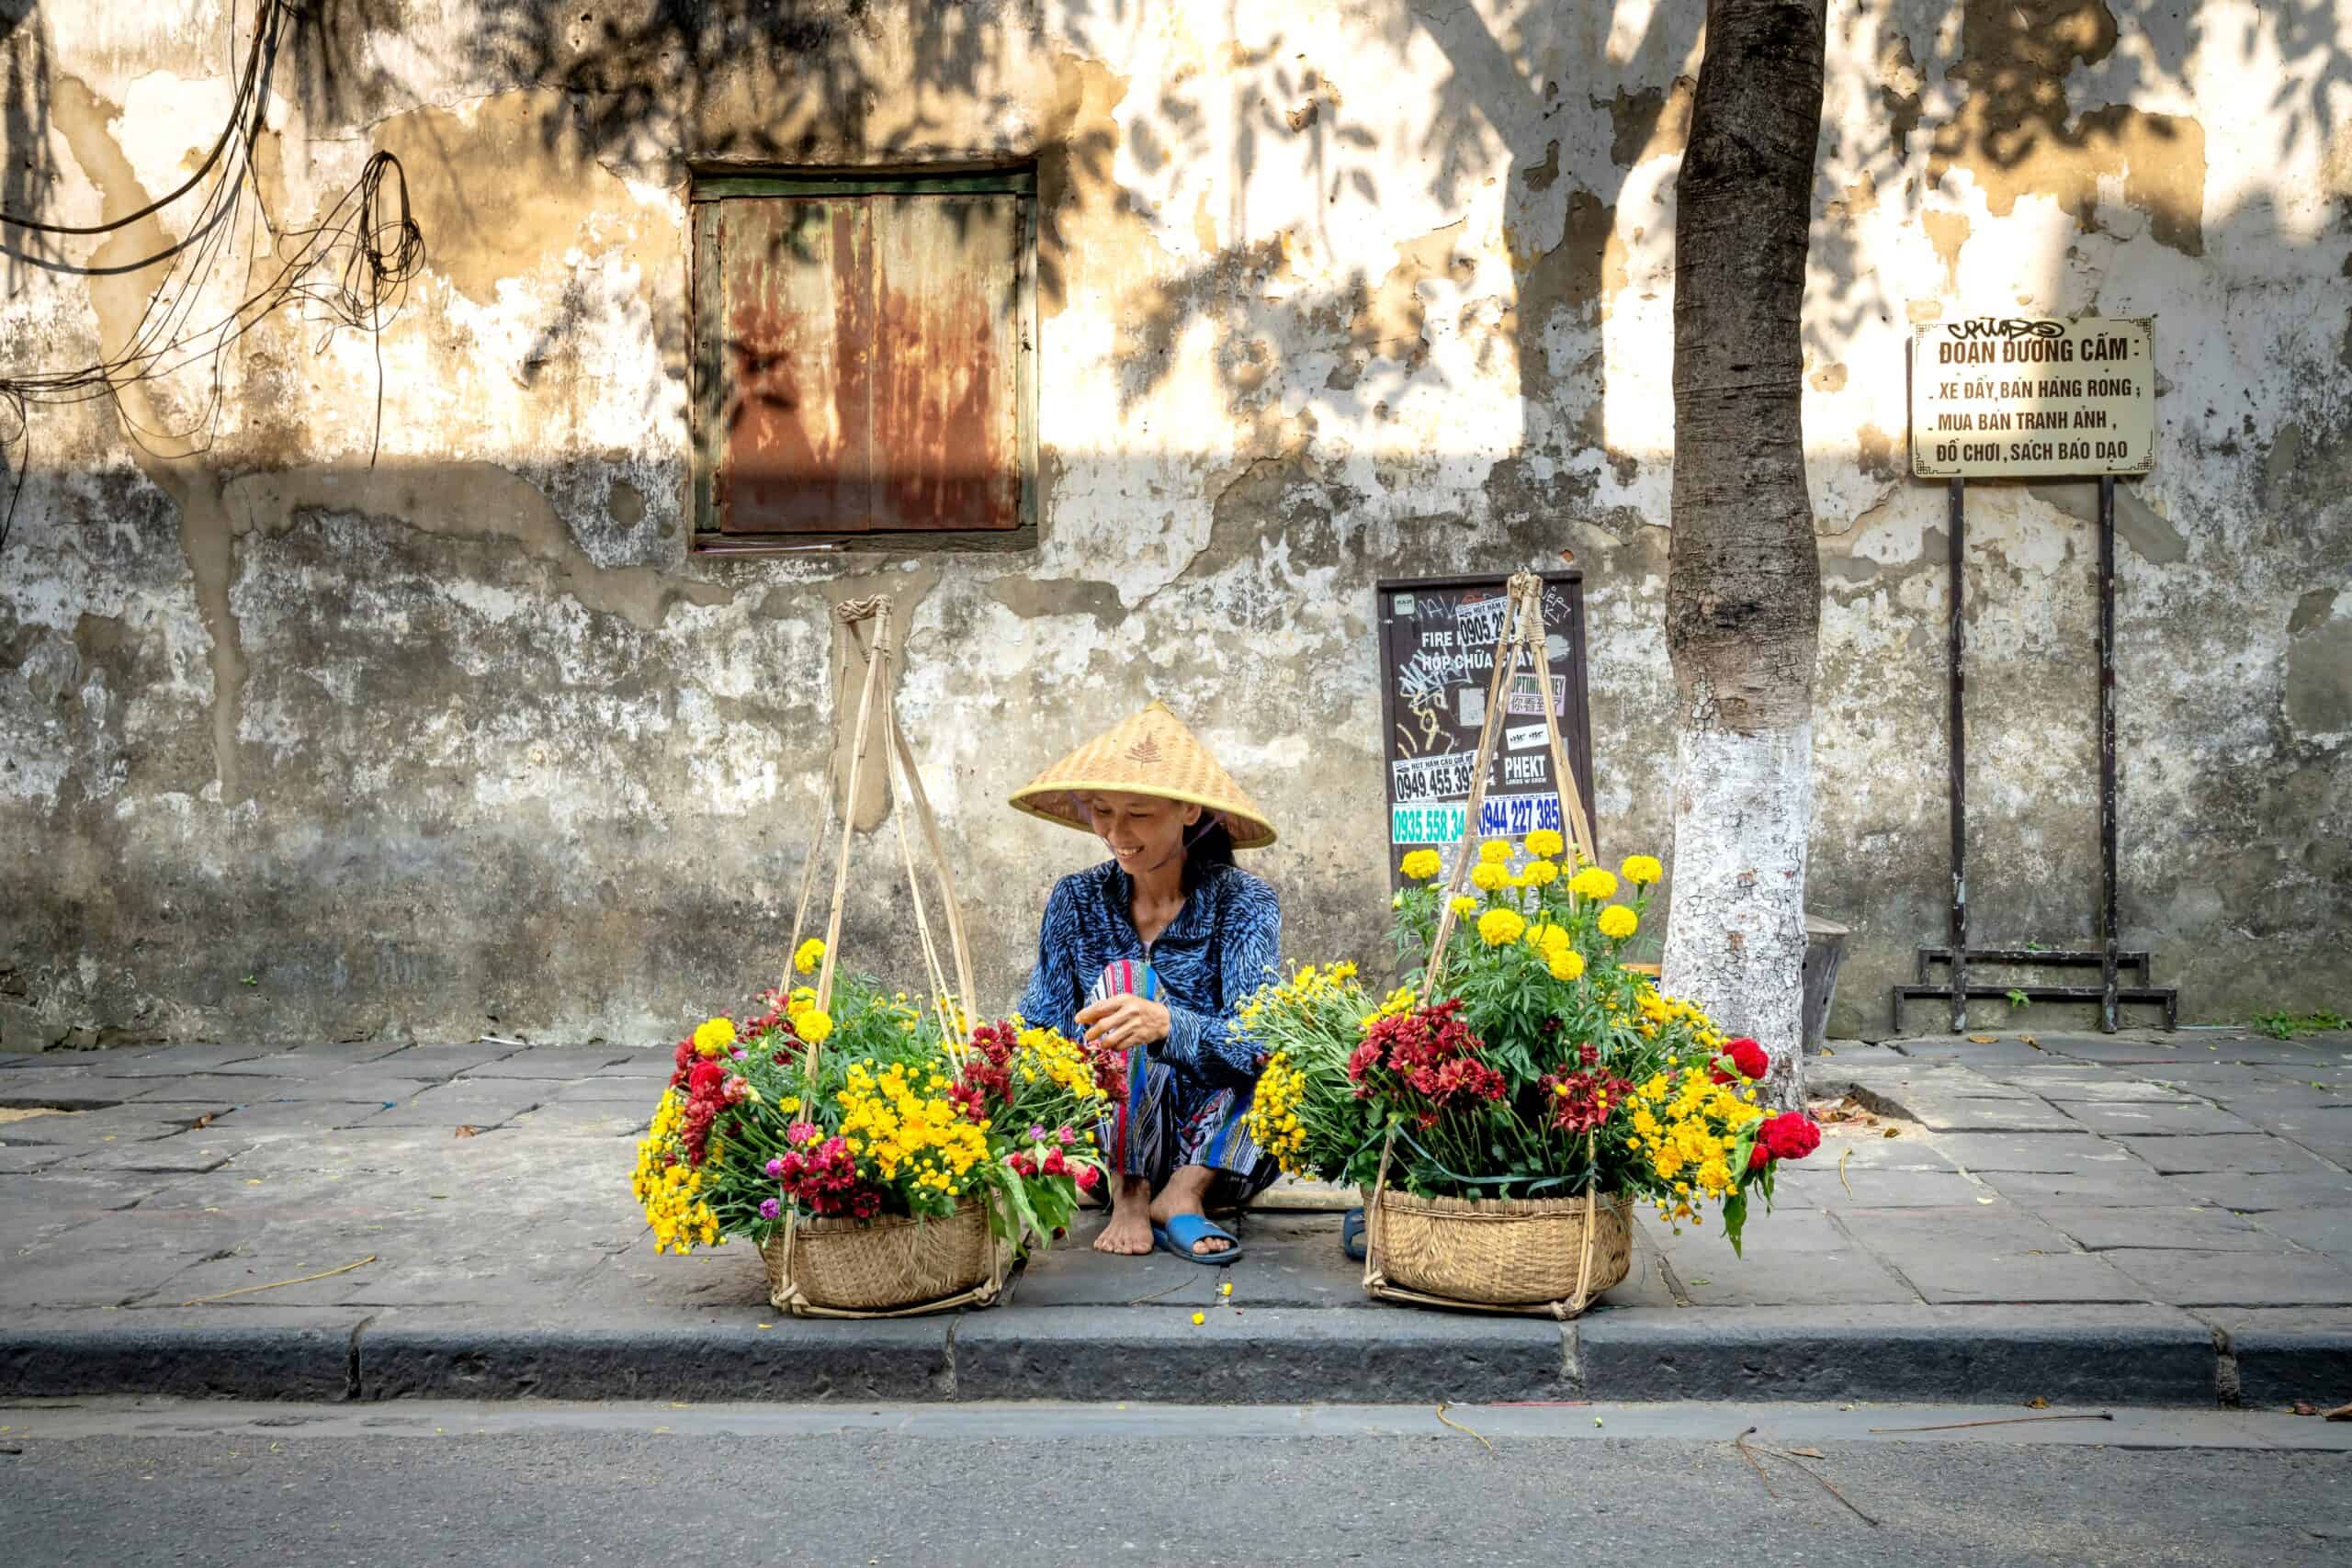 <p>Hoi An’s well-preserved architecture, lantern-lit streets, and culinary delights make it a charming destination for retirees. Explore the Old Town, indulge in local cuisine, and enjoy the city’s relaxed pace.</p>